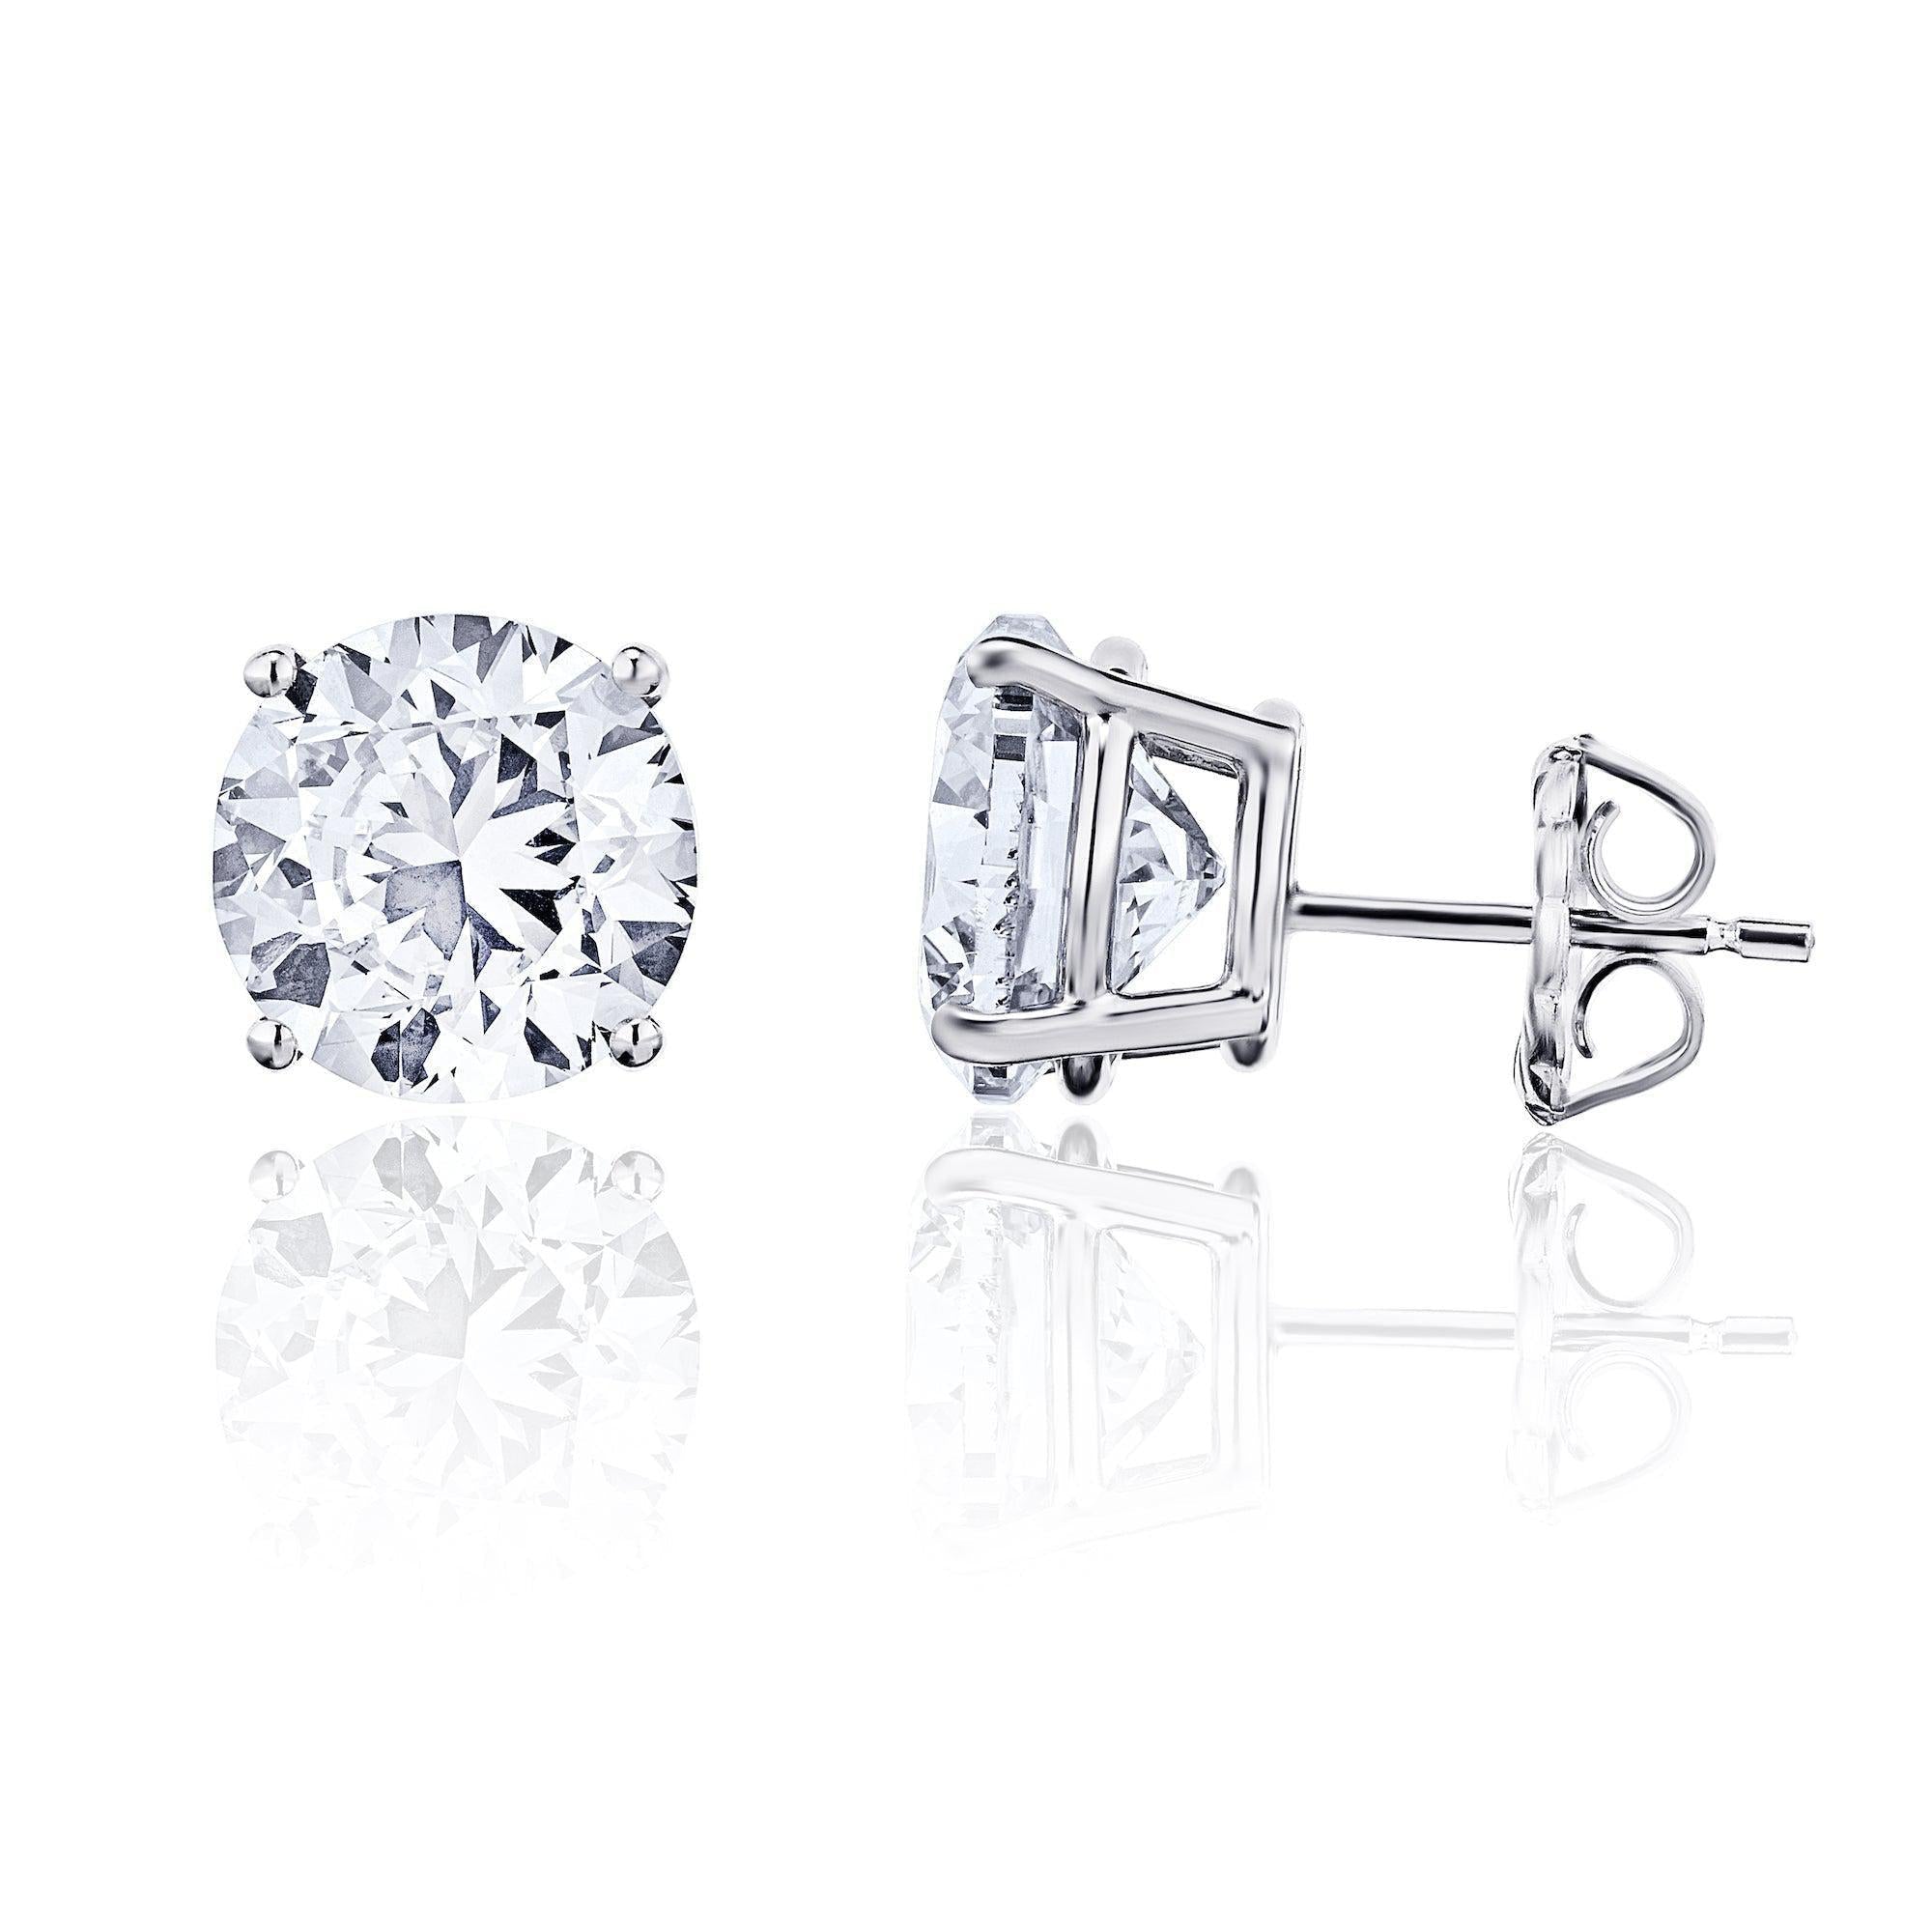 Mens 3 Carat Round Lab Grown Diamond Single Stud Earrings in White Gold - 4 Prong